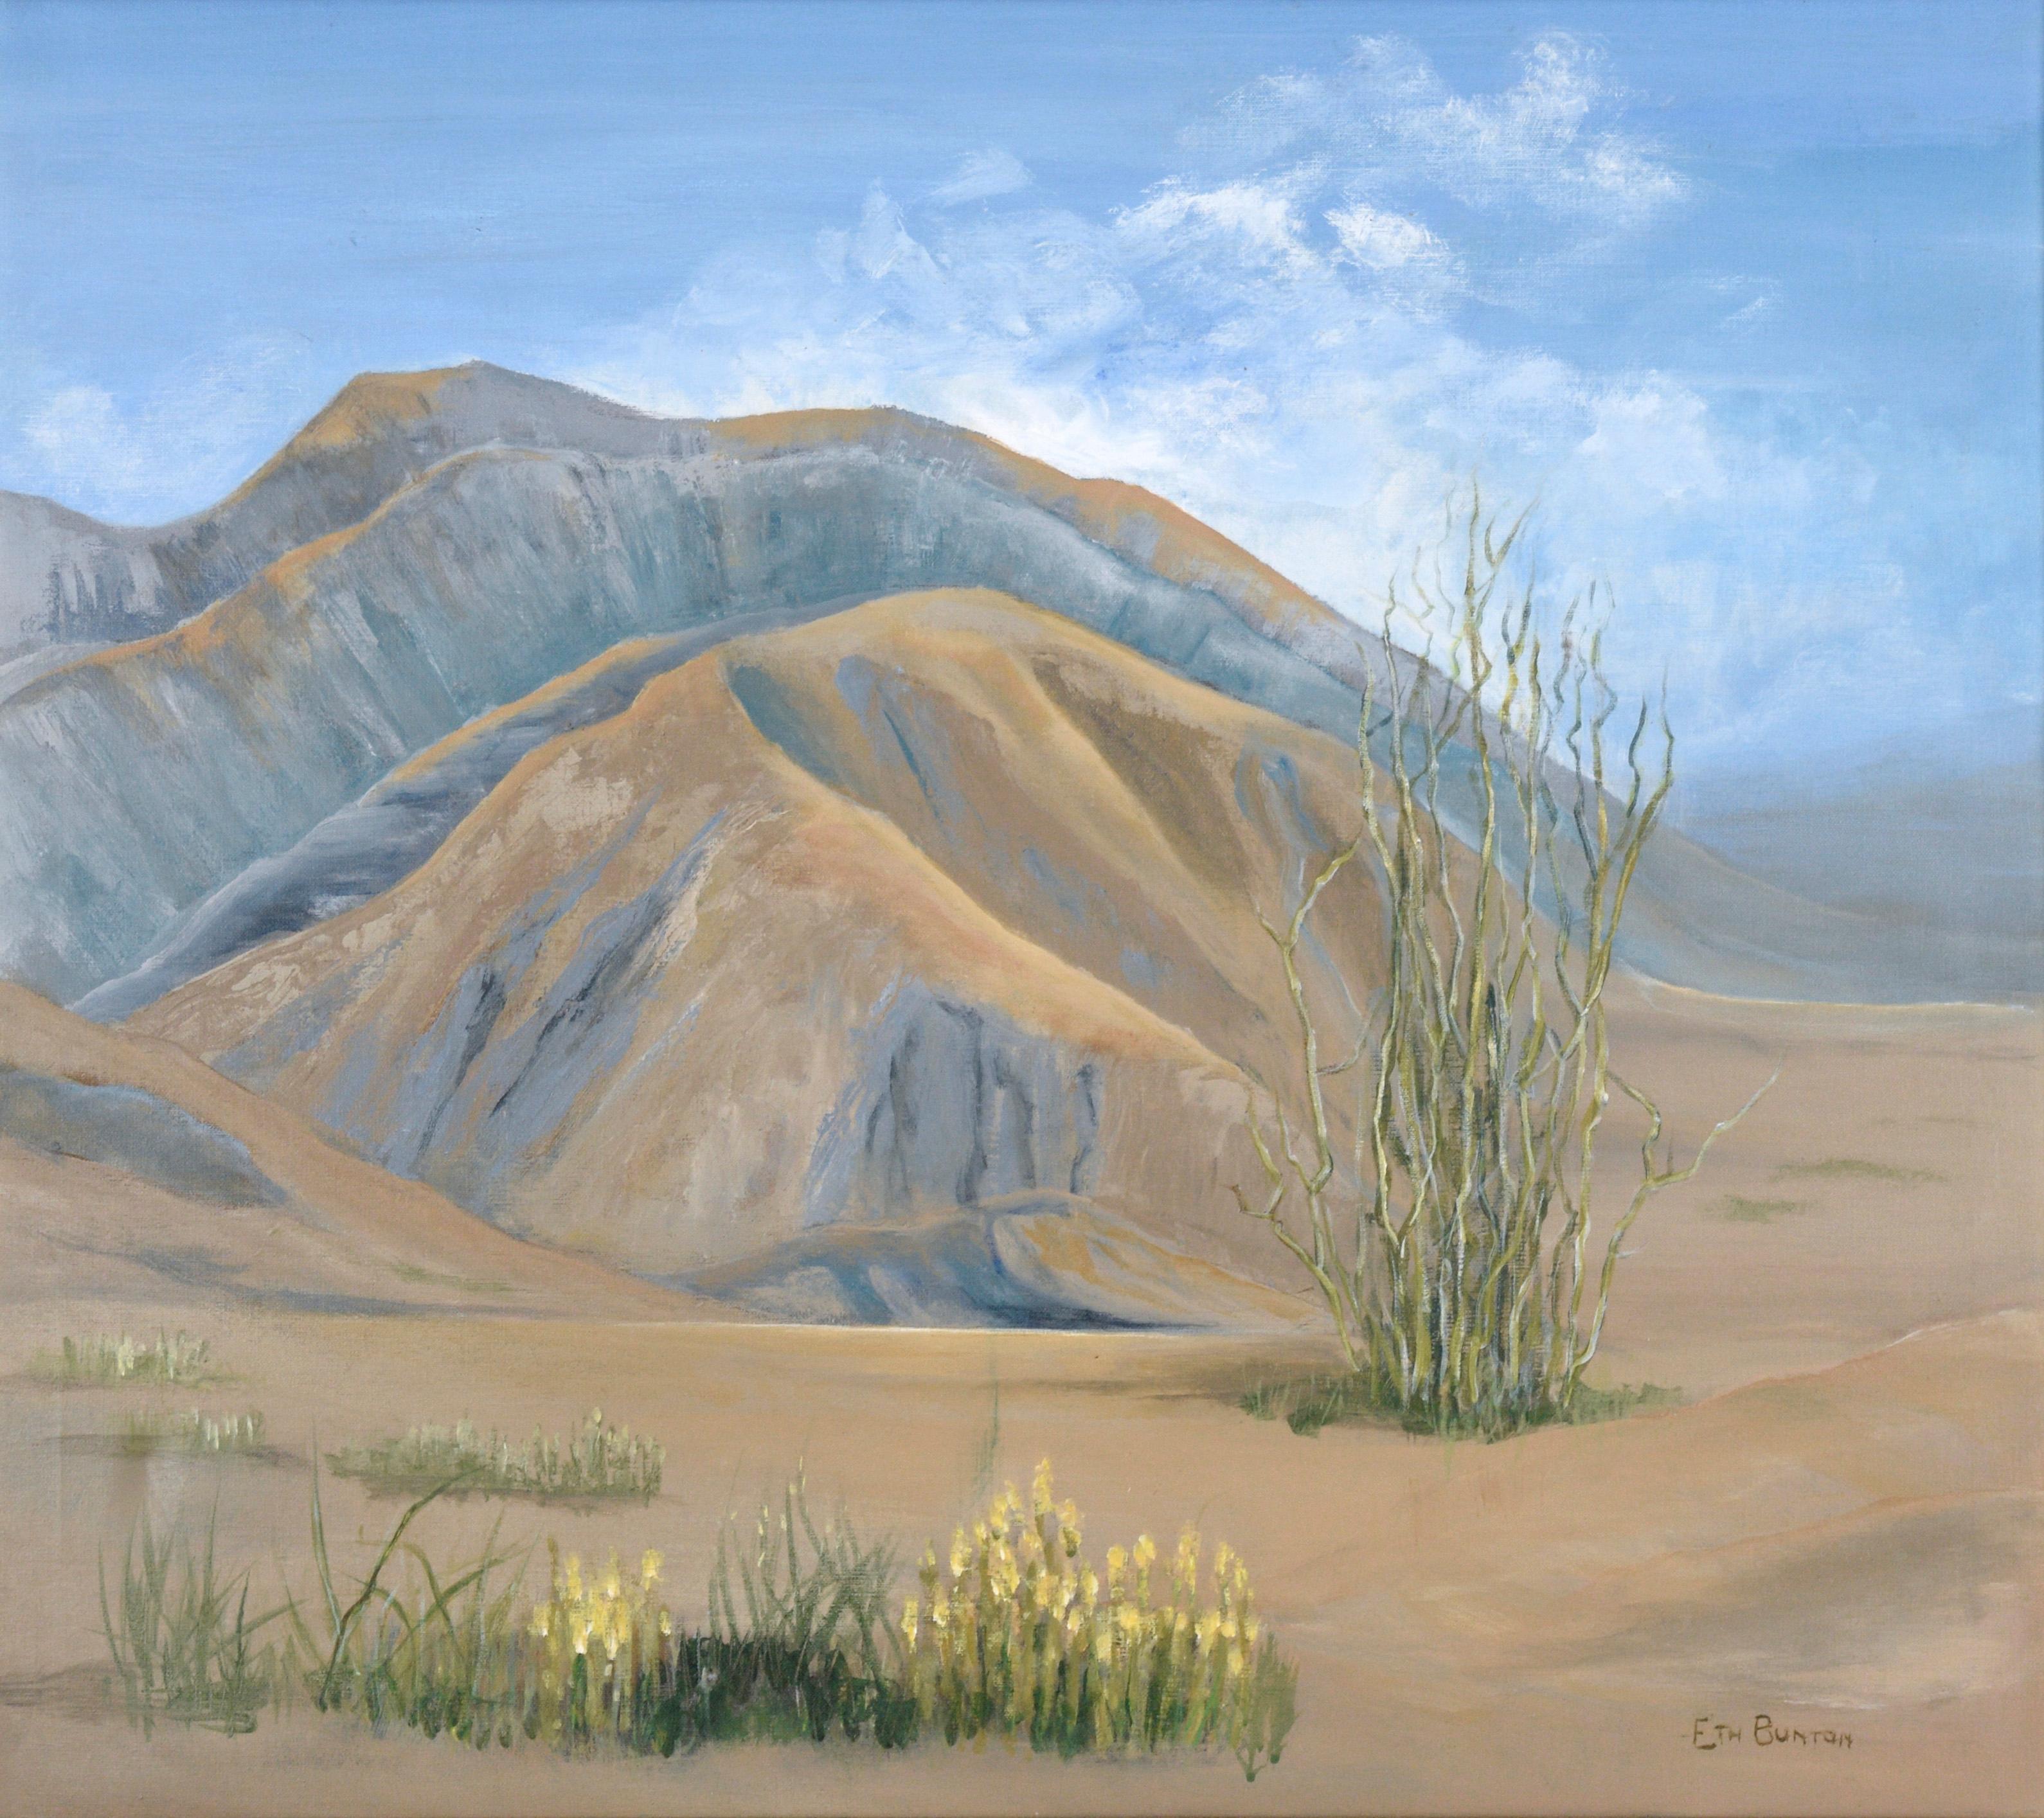 Desert Foothills Under a Blue Sky - Landscape in Acrylic on Canvas - Painting by Eth Bunton